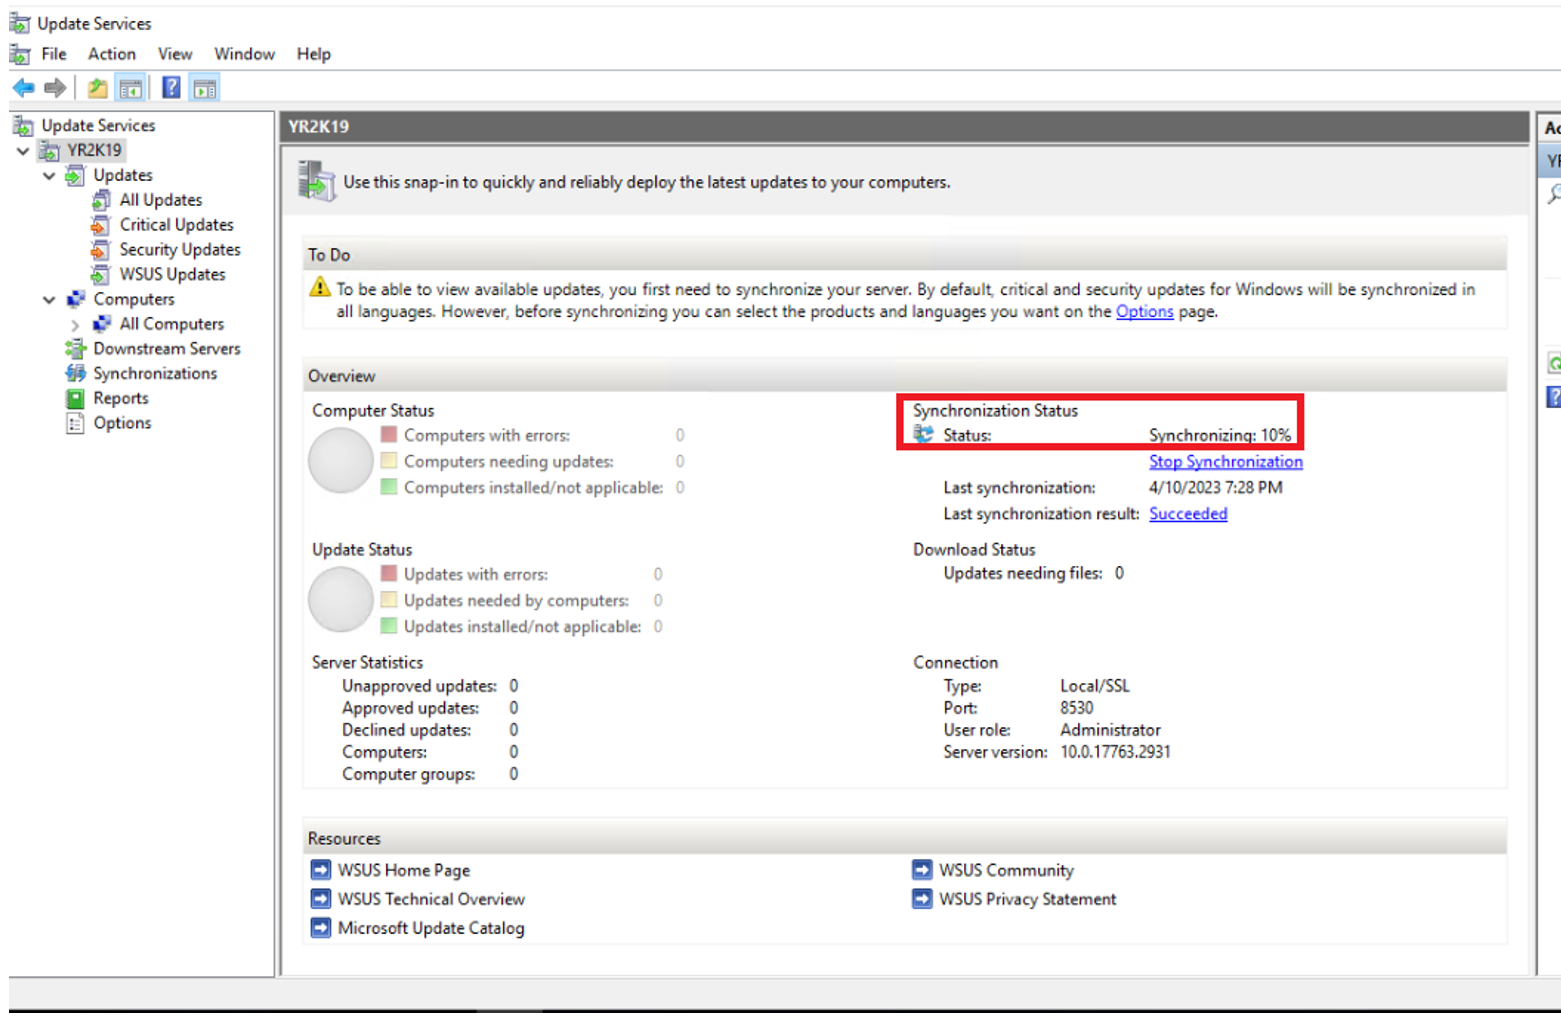 Screenshot that shows a screen capture of the Update Services snap-in console with YR2K19 shown.